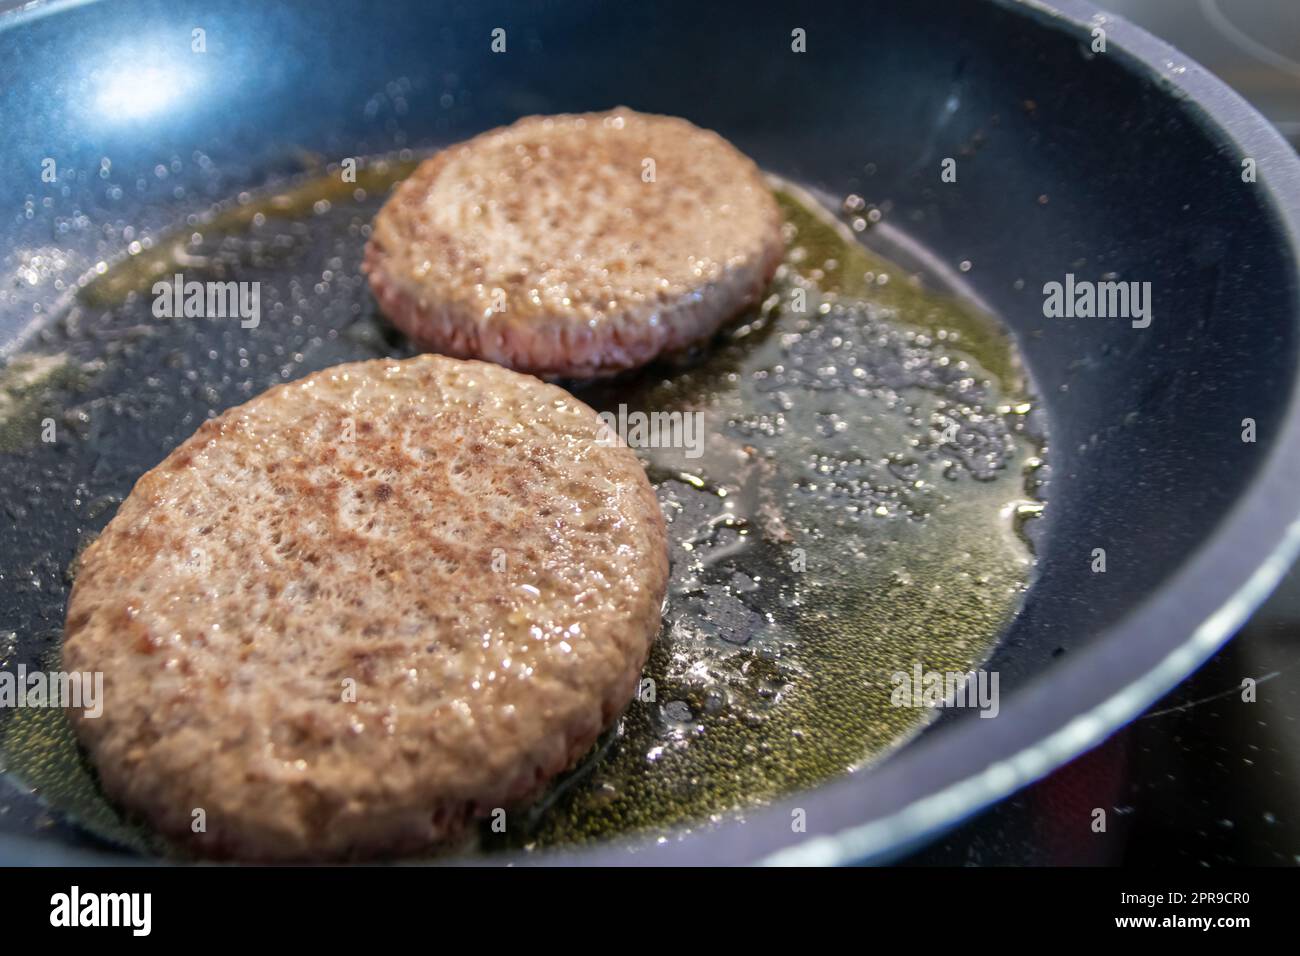 Two burger patties burger meat sizzling in hot pan with fat and oil as delicious selfmade hamburger bbq meatballs as unhealthy fast food lunch with lots of calories and cholesterol in frying pan Stock Photo